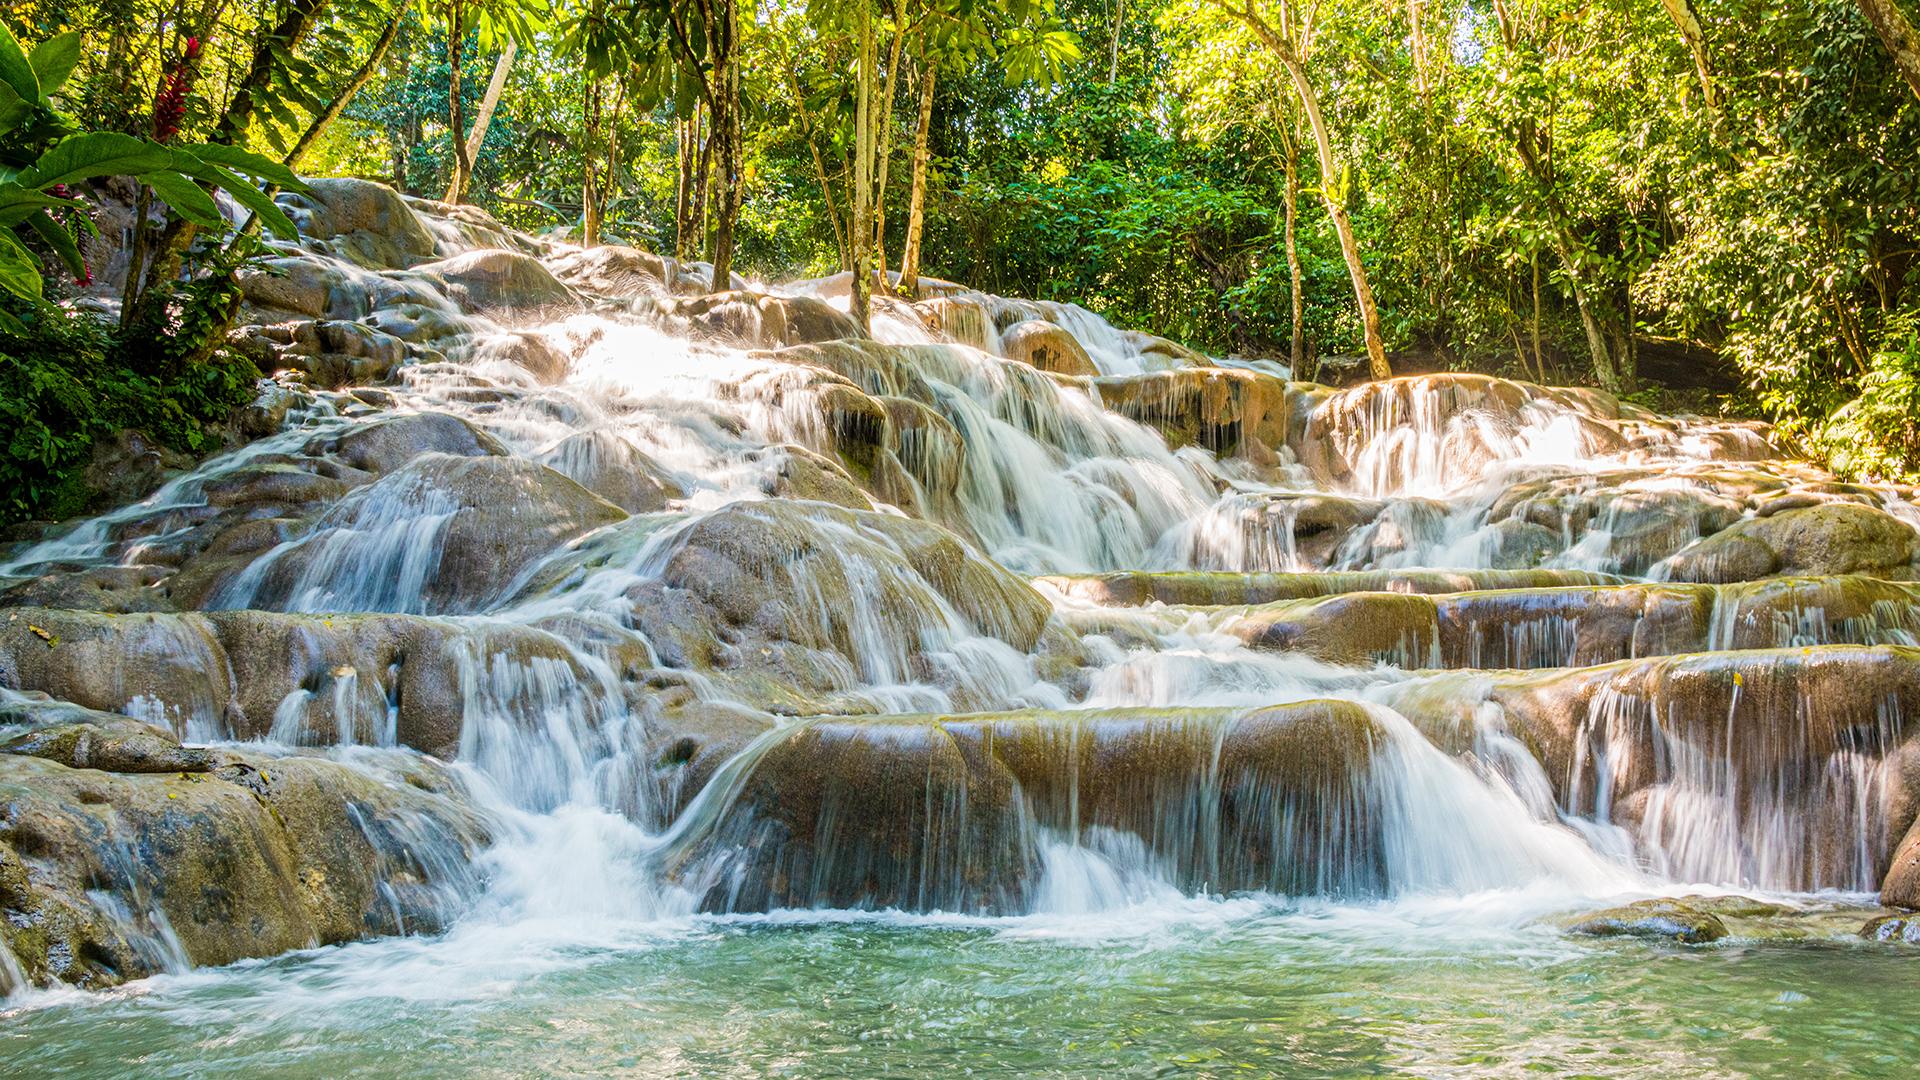 The best Caribbean islands to visit | Dunn’s River Falls